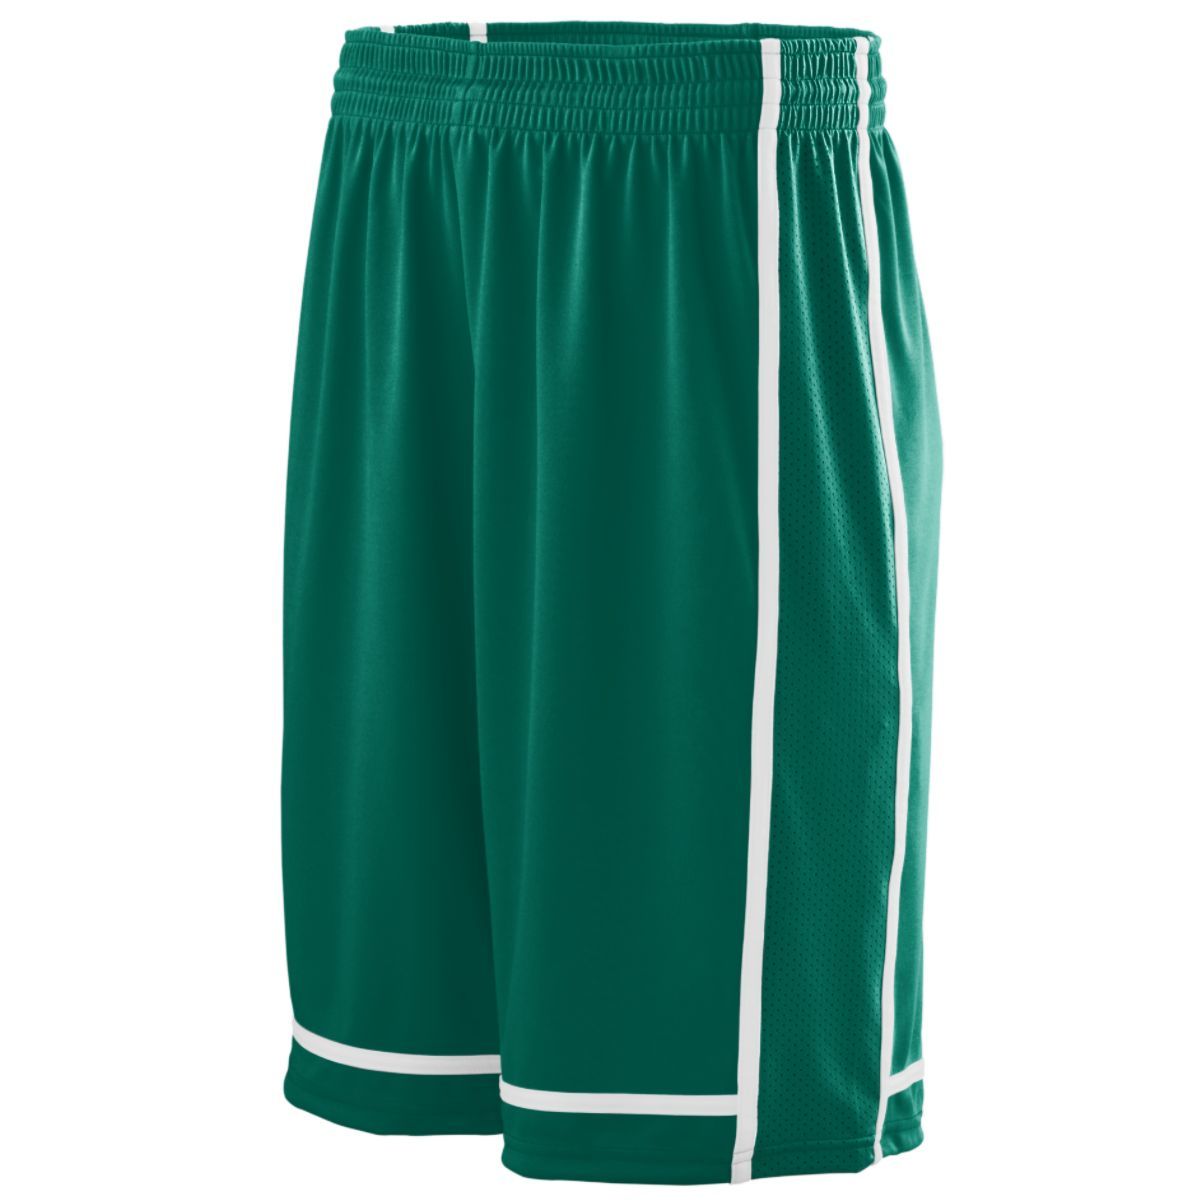 Augusta Sportswear Winning Streak Shorts in Dark Green/White  -Part of the Adult, Adult-Shorts, Augusta-Products, Basketball, All-Sports, All-Sports-1 product lines at KanaleyCreations.com